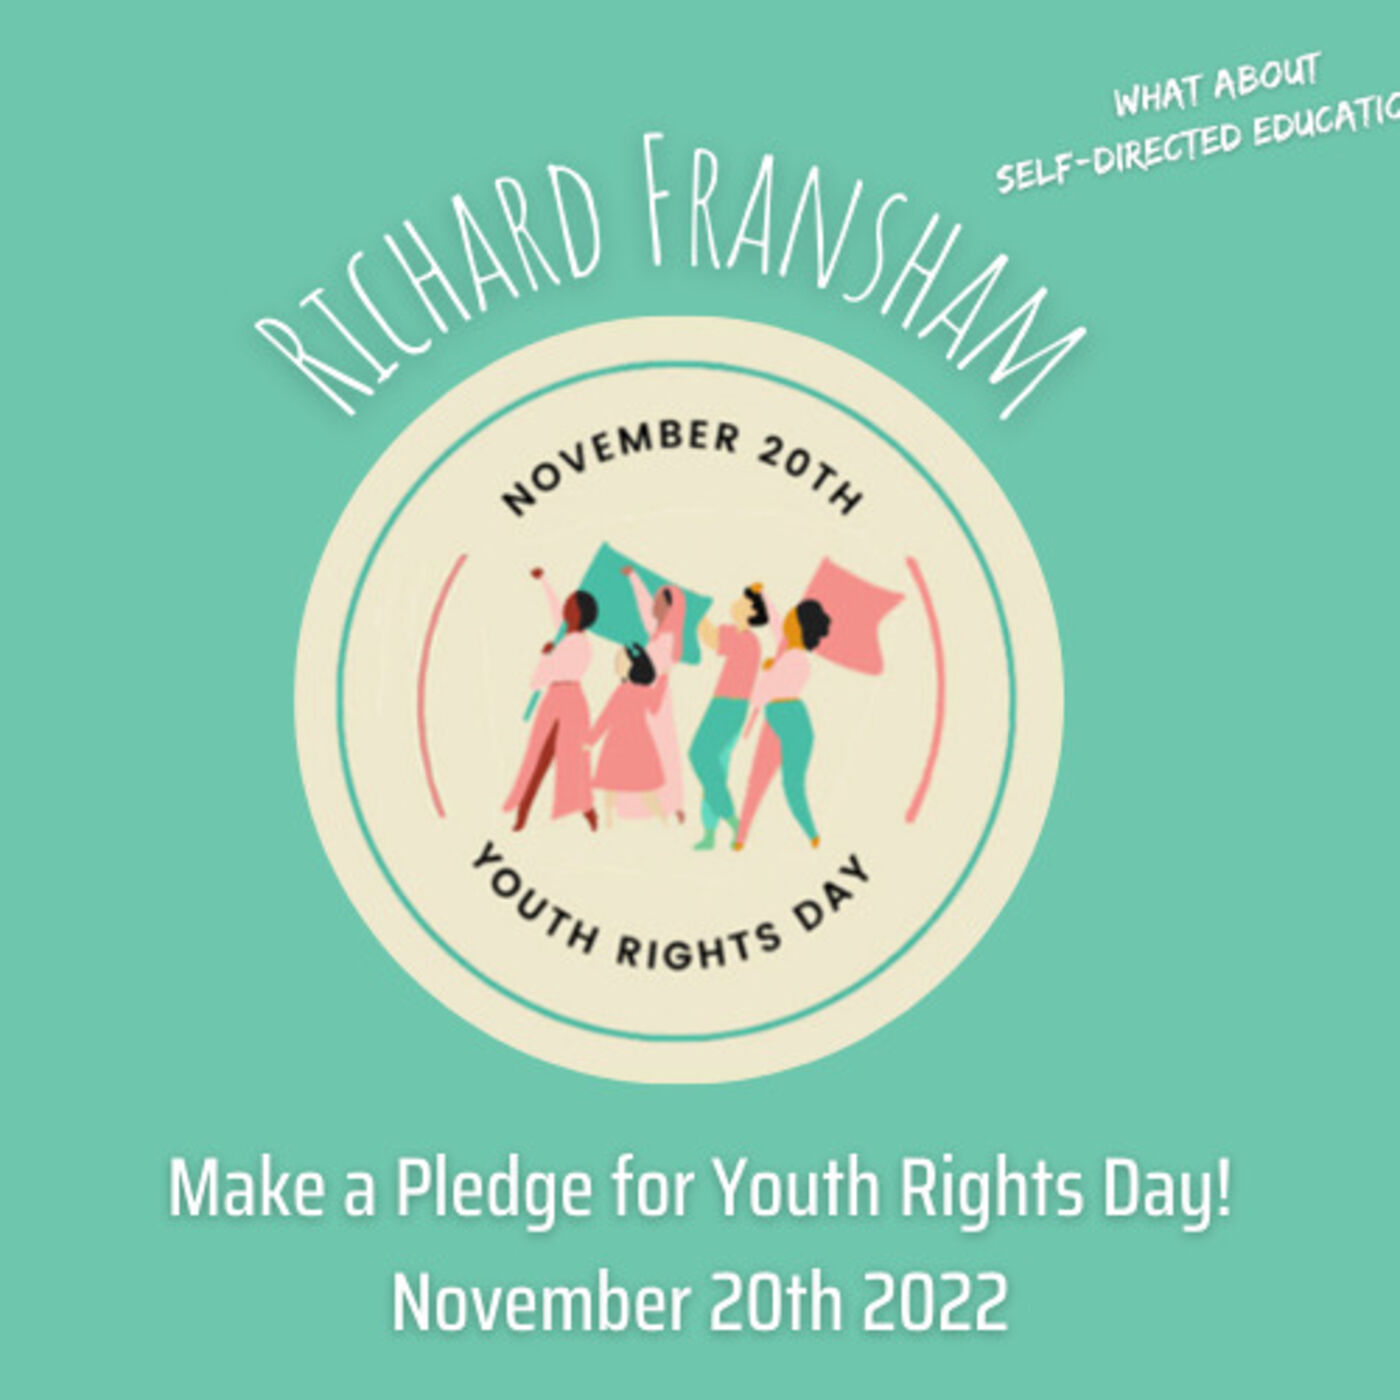 Make a pledge for November 20th 2022 Youth Rights Day - Max Sauber in conversation with Richard Fransham